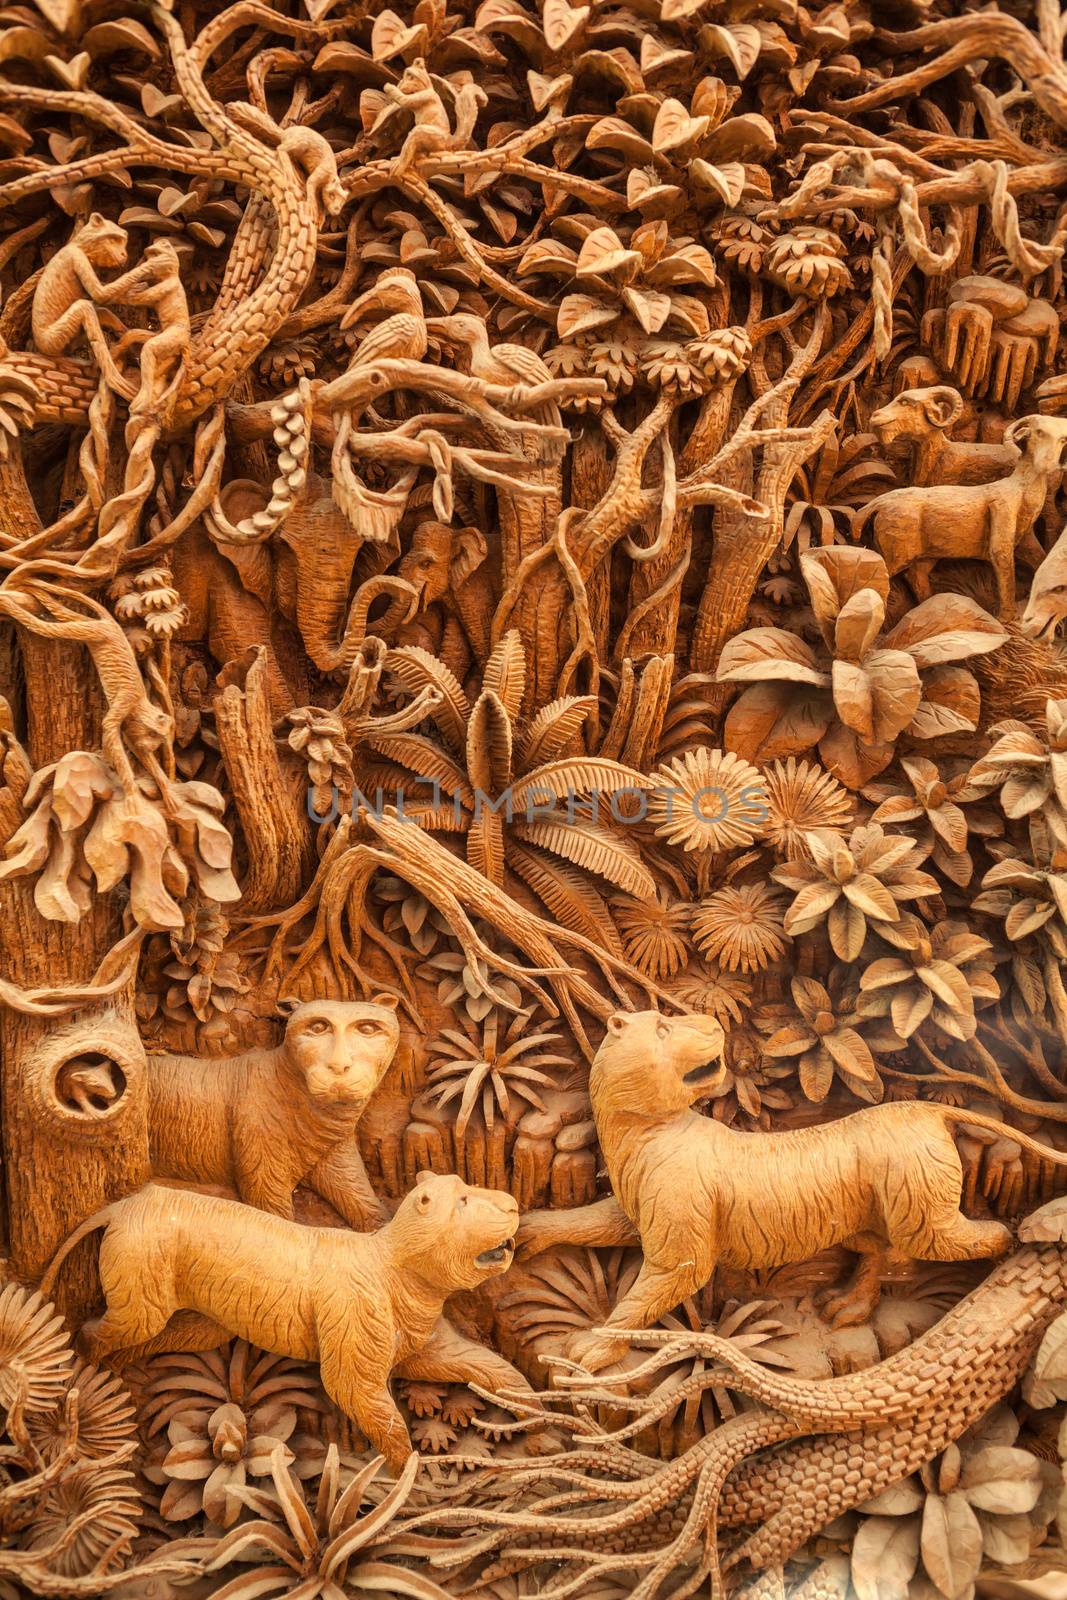 Carved Thai tiger on the wood